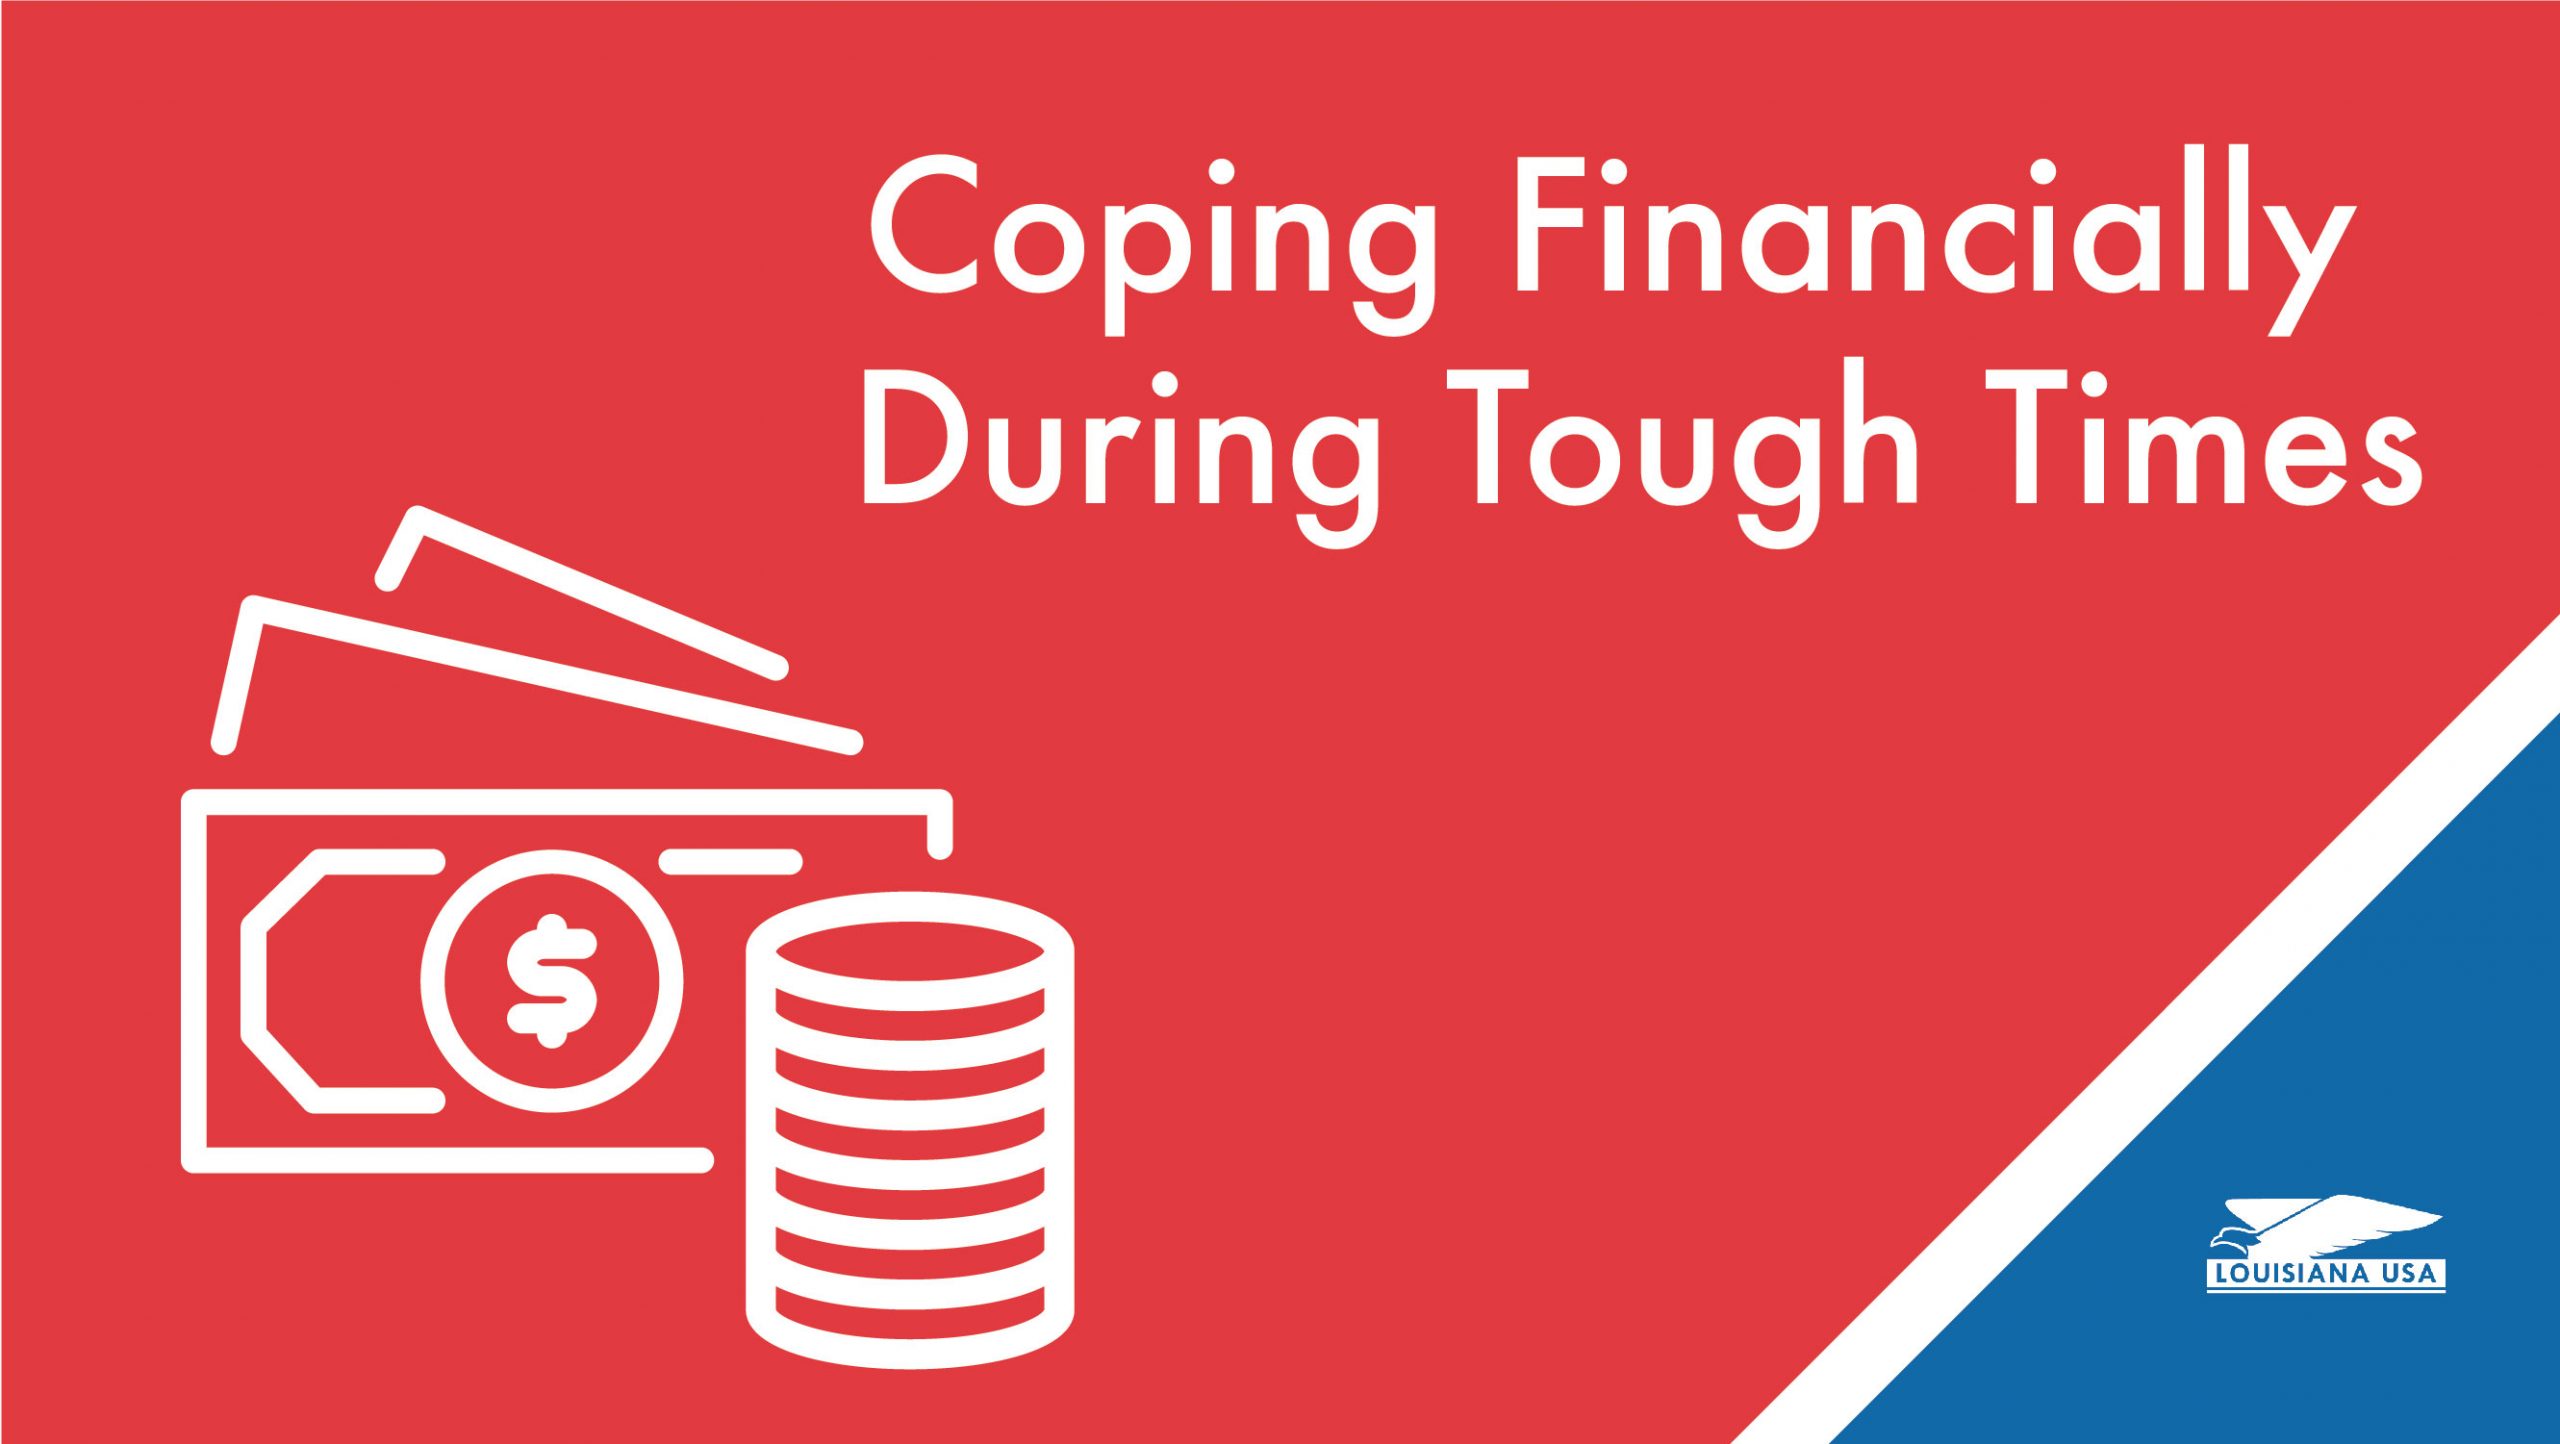 Coping Financially During Tough Times